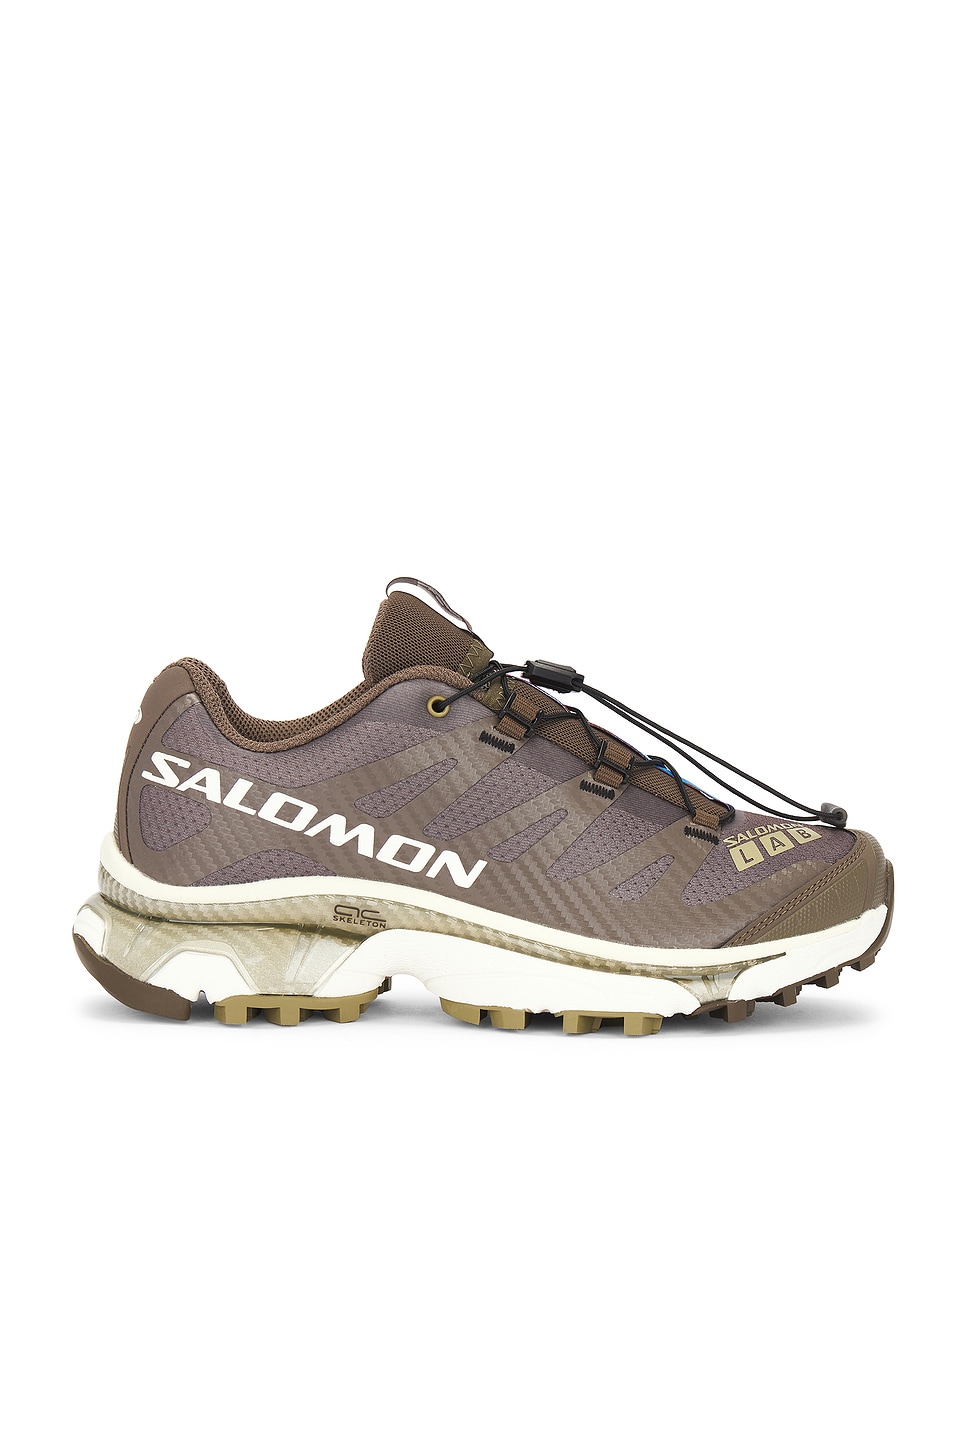 Image 1 of Salomon XT-4 OG Aurora Borealis Sneaker in Canteen, Transparent Yellow, & Dried Herb